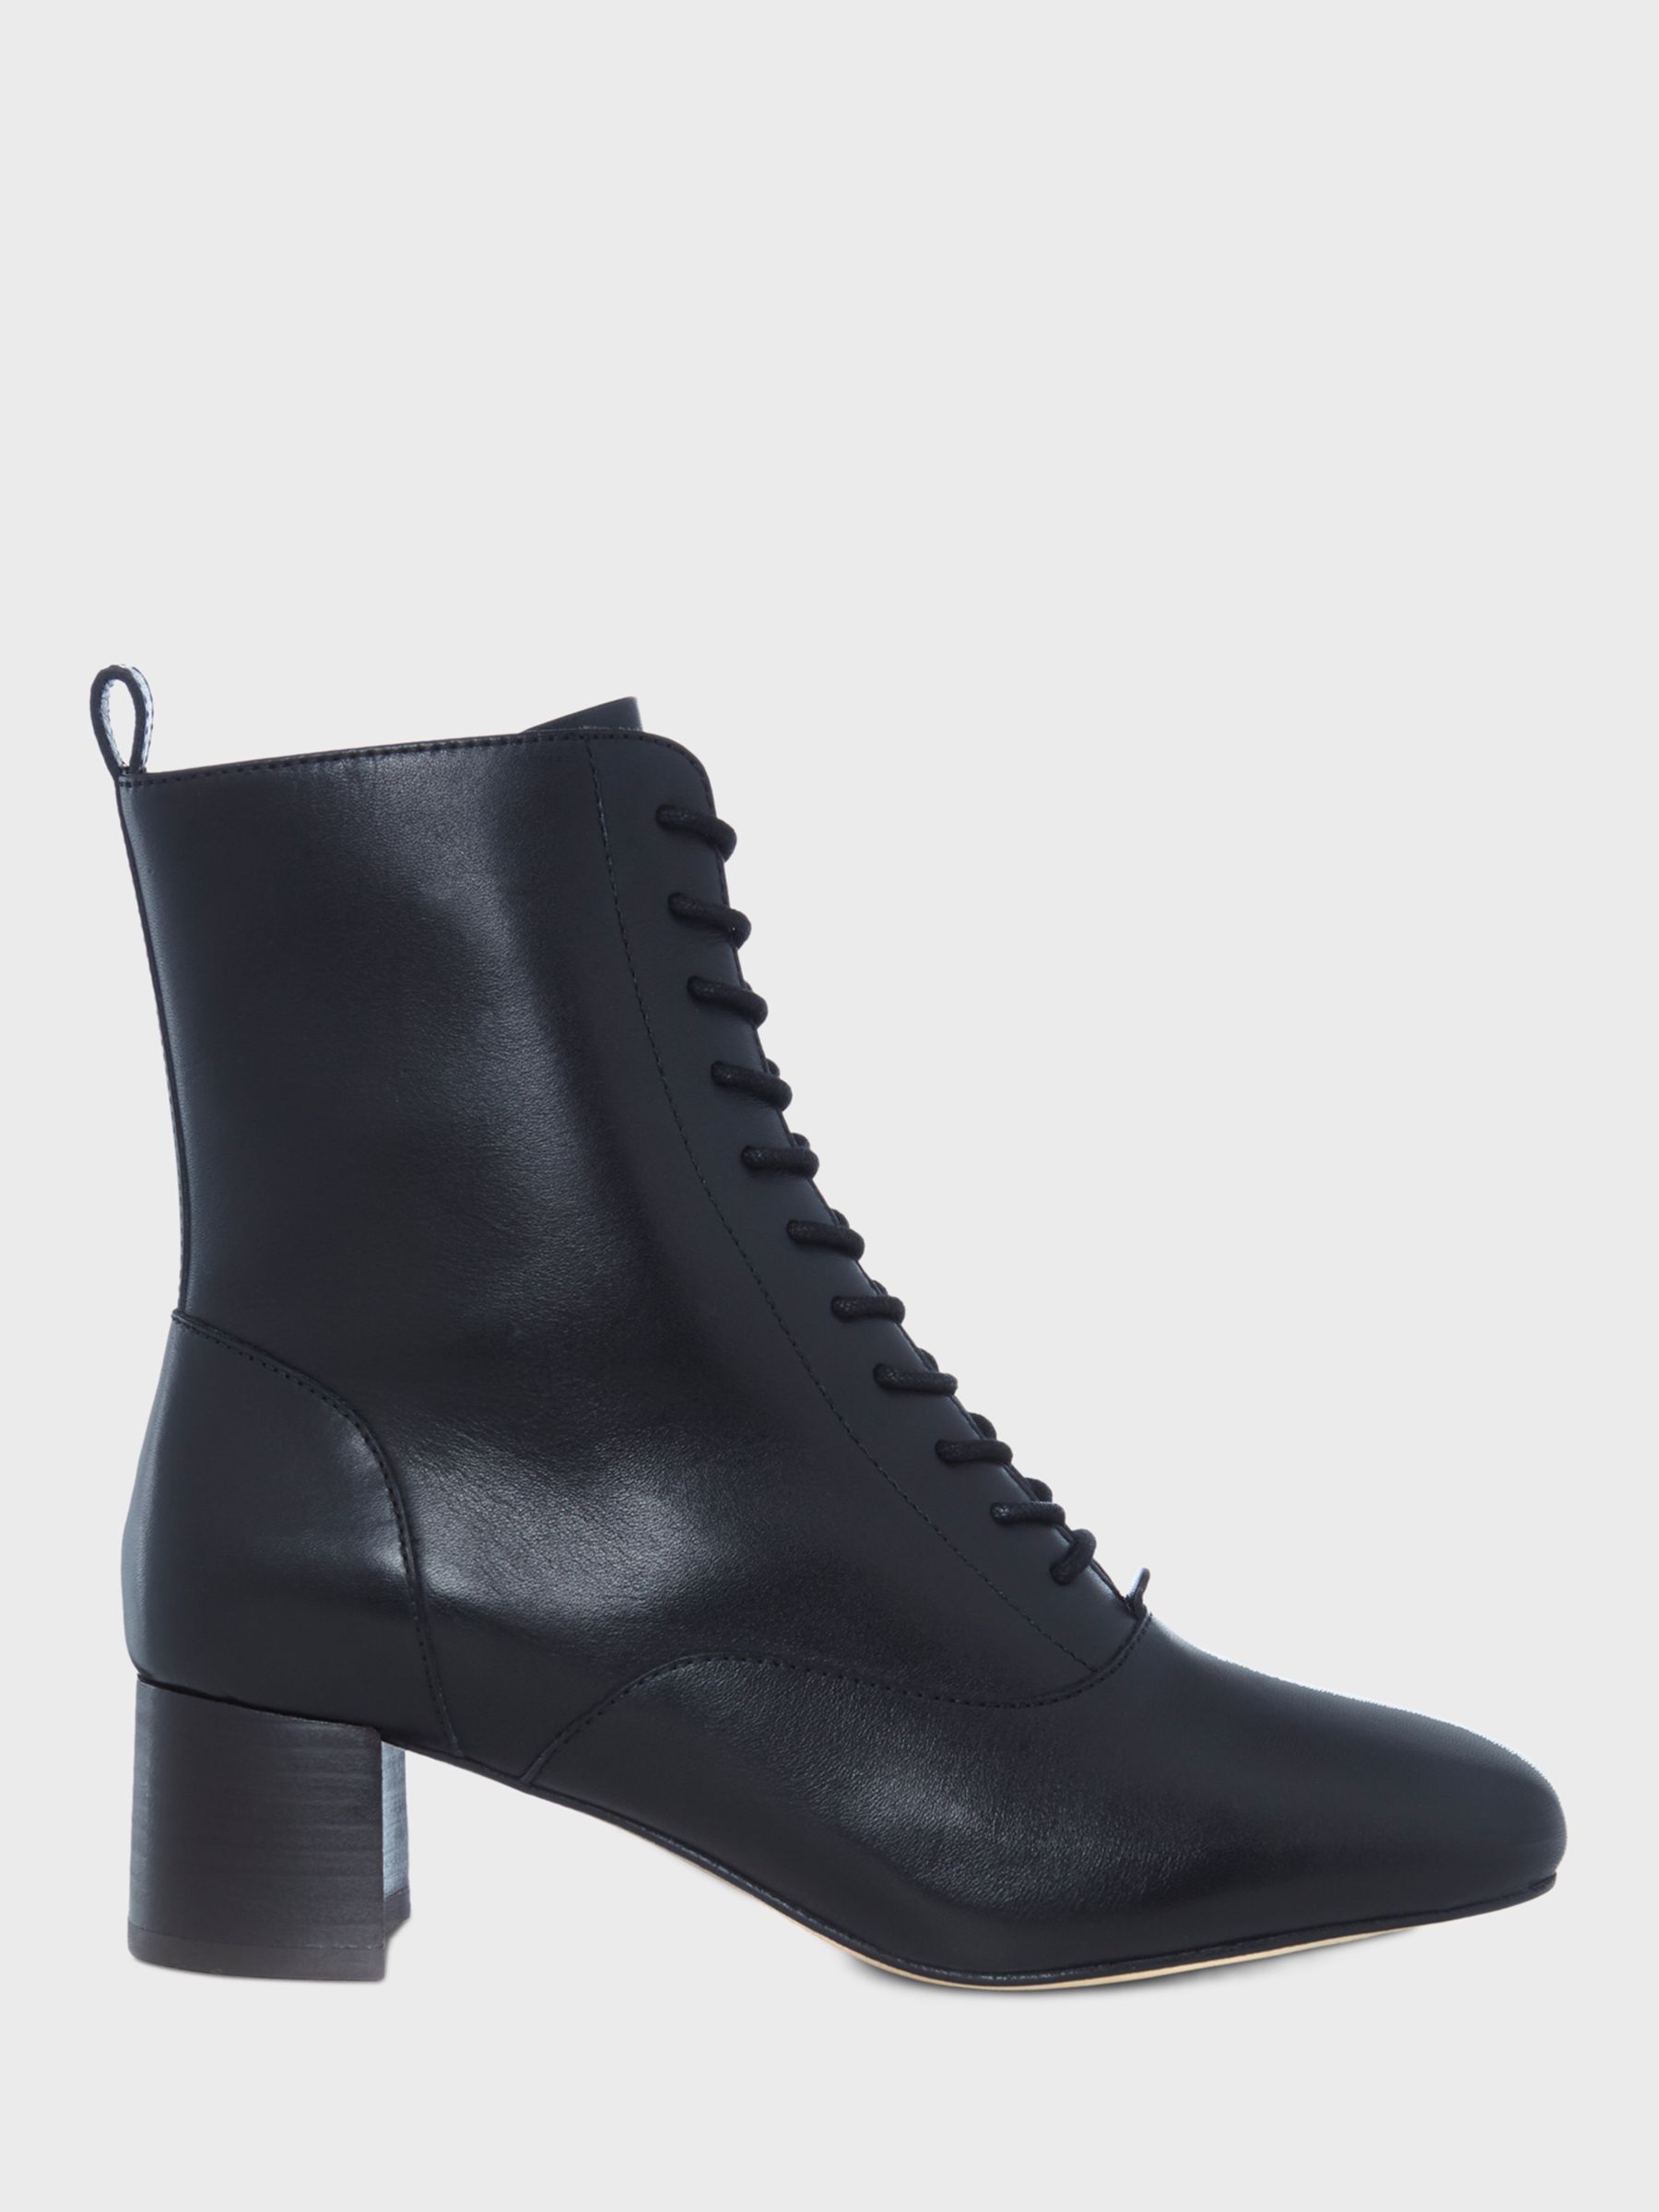 Hobbs Issy Leather Lace Up Ankle Boots, Black at John Lewis & Partners